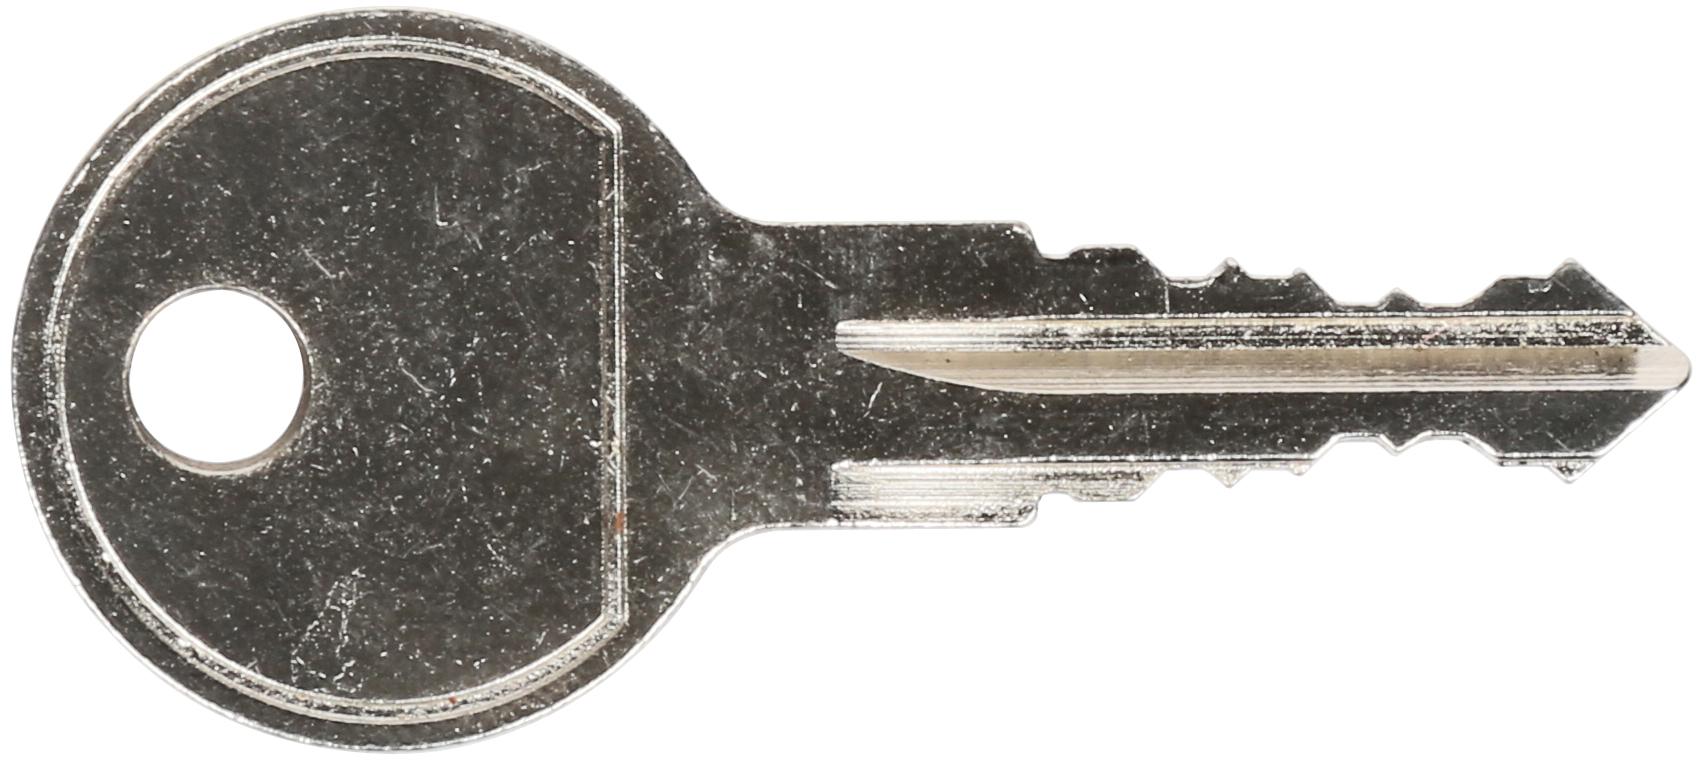 Spare Roof Box Key 006